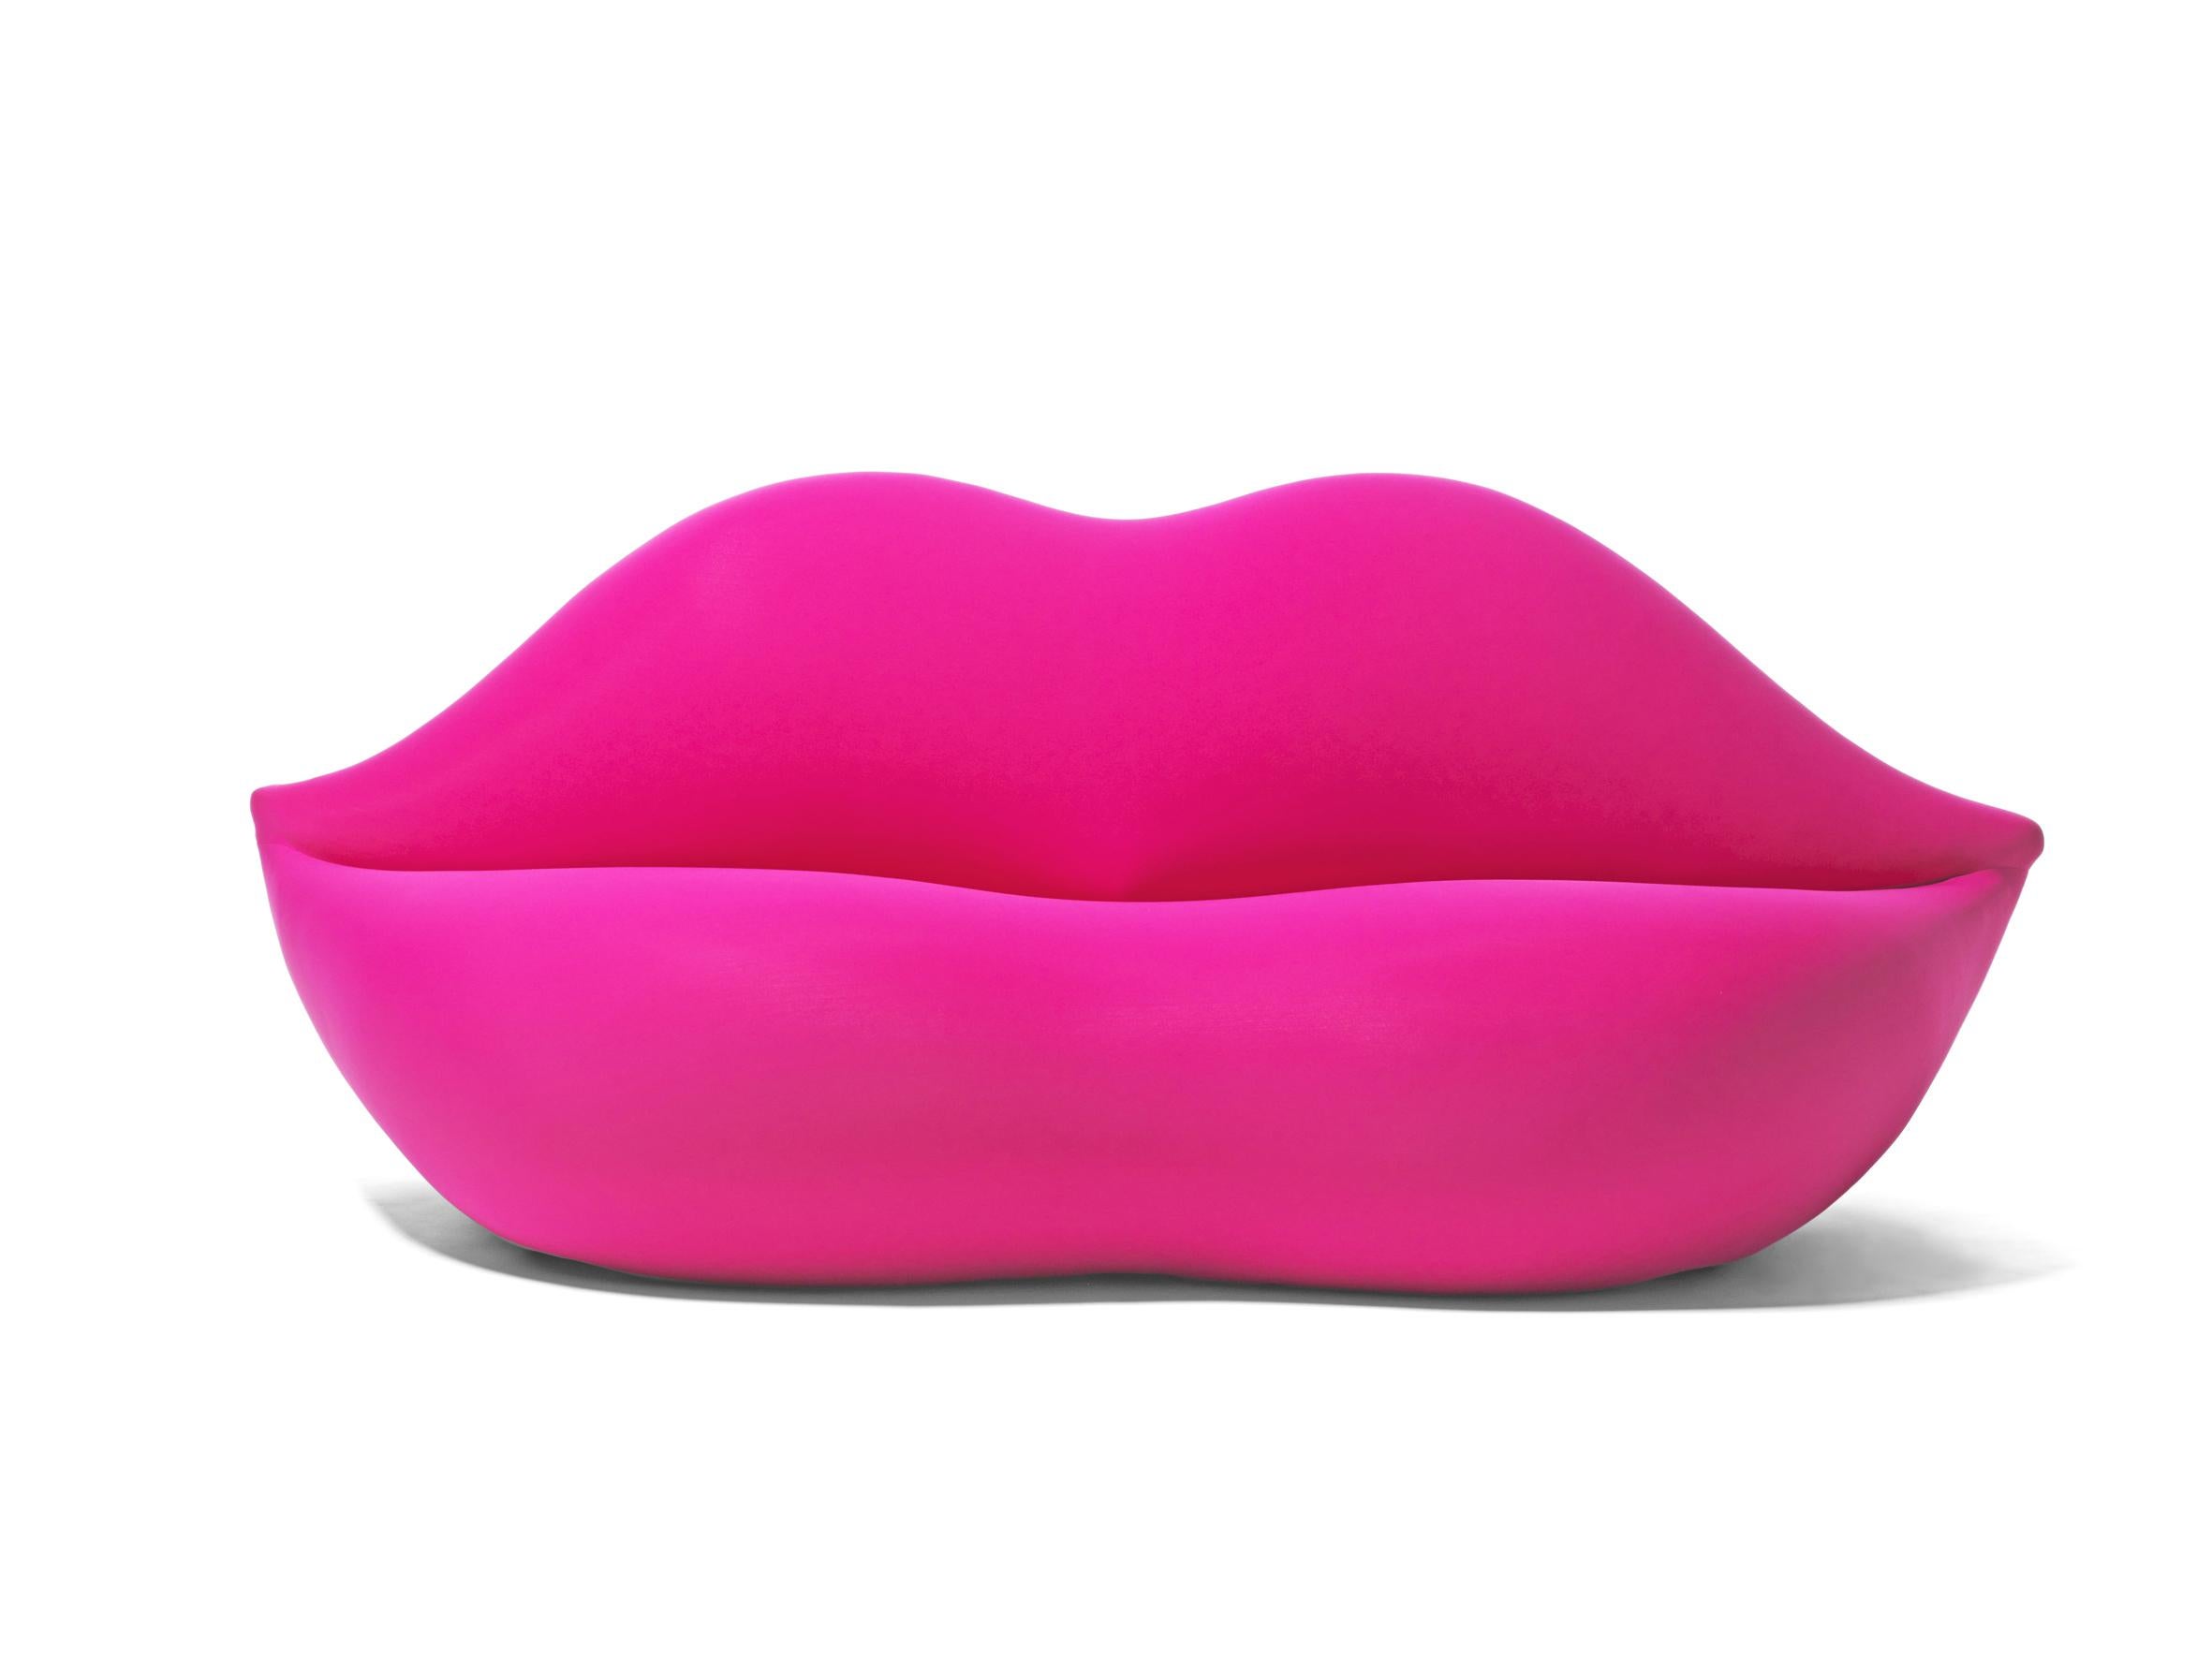 Bocca, the original 1970 lips-shaped couch is only Gufram's. This sensual couch, which is ideal for a tête-à-tête, has entered the collective imagination on par with Andy Warhol's works, as well as other pop art masterpieces and represents the